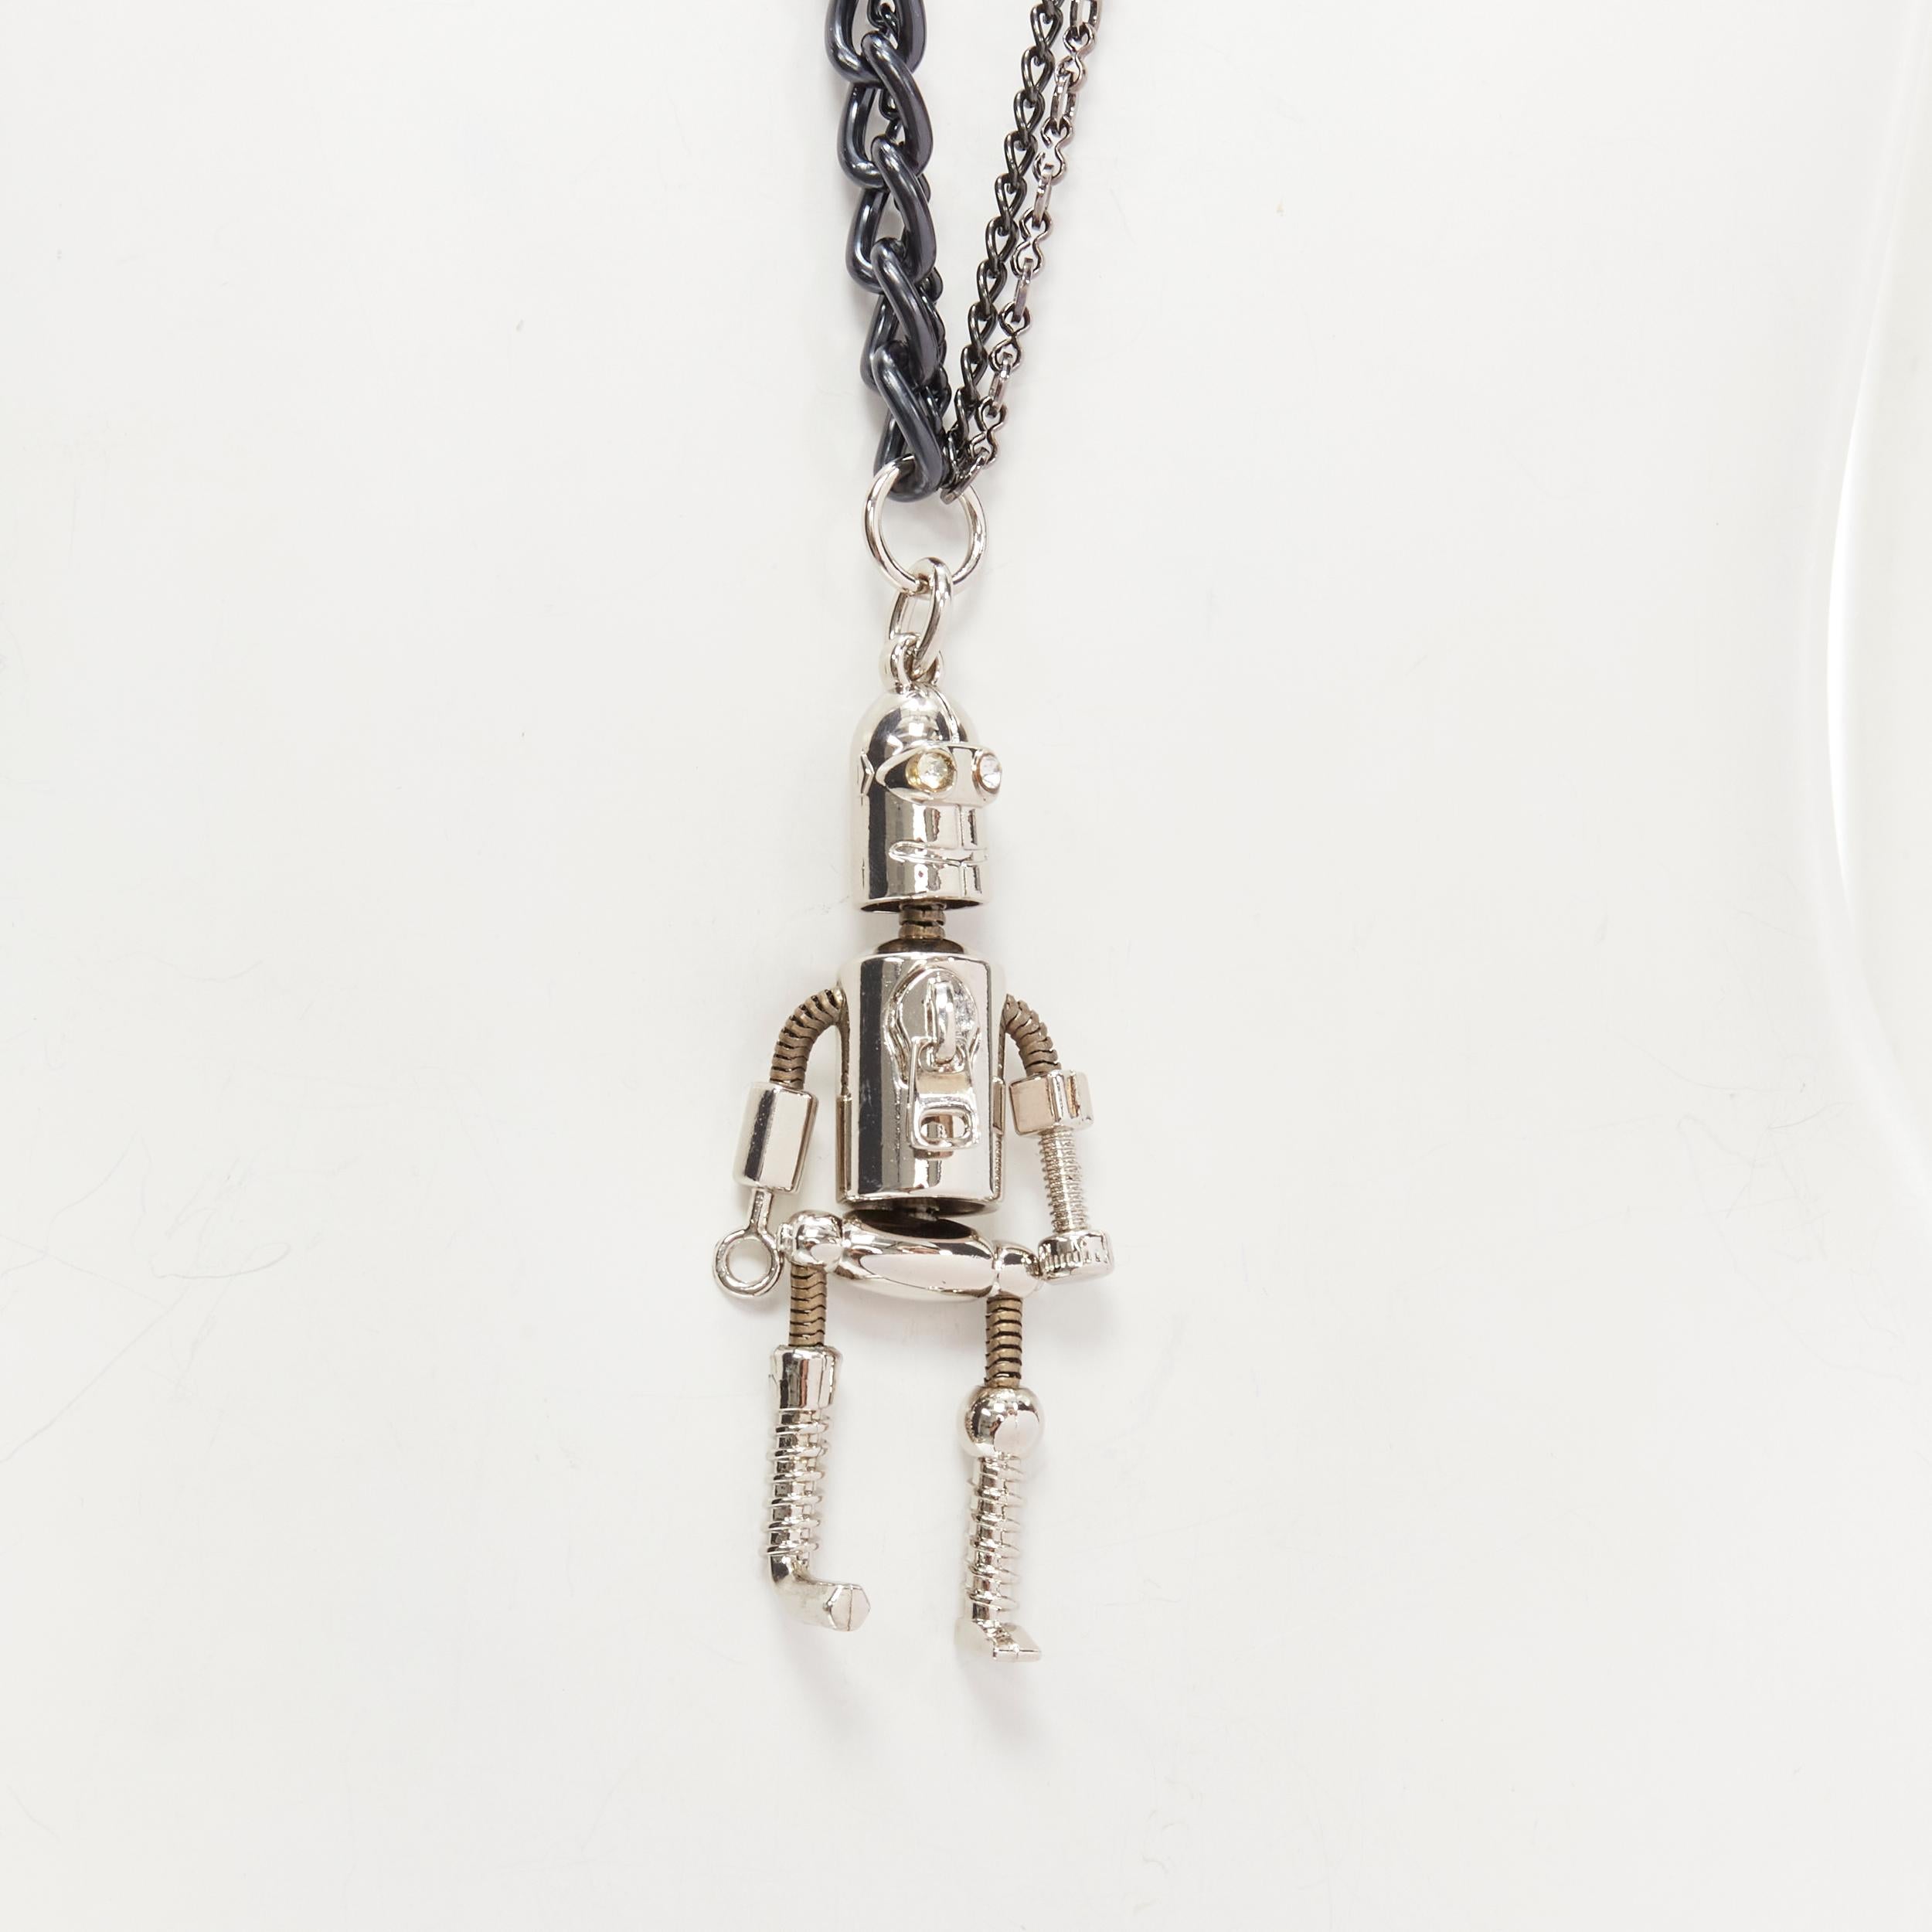 VENNA silver robot charm gunmetal chain acrylic squares long necklace
Reference: ANWU/A00277
Brand: Venna
Material: Metal, Acrylic
Color: Silver, Black
Closure: Pull On
Extra Details: Zipper head detail on robot.

CONDITION:
Condition: Excellent,